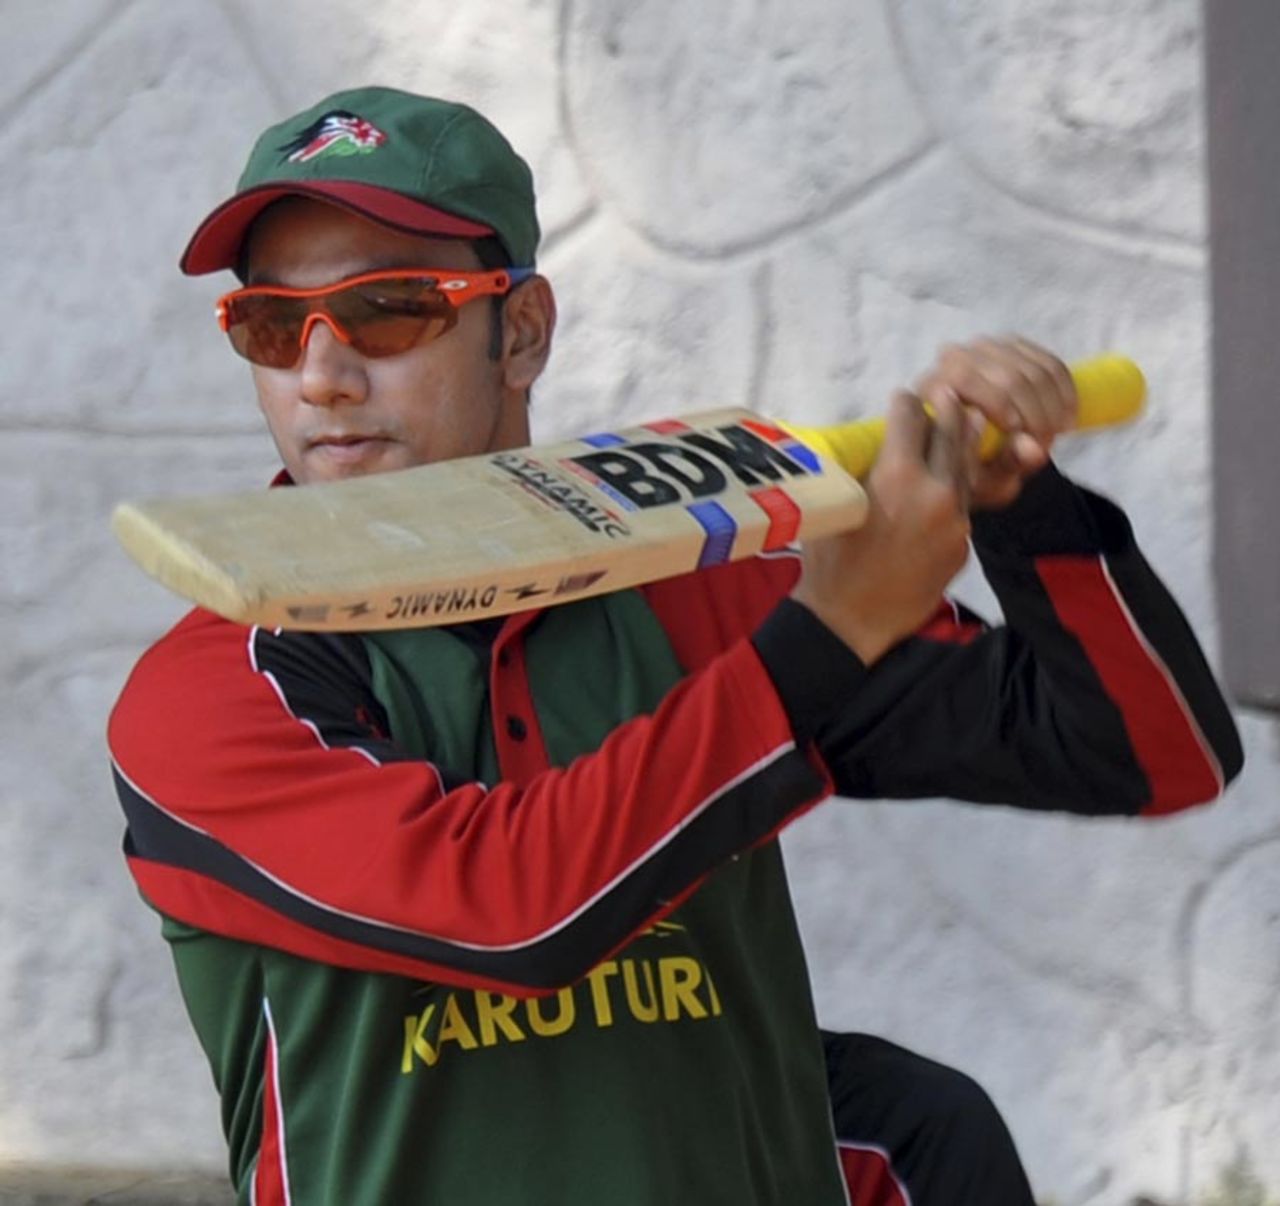 Tanmay Mishra checks his bat during a training session, Bangalore, March 10, 2011